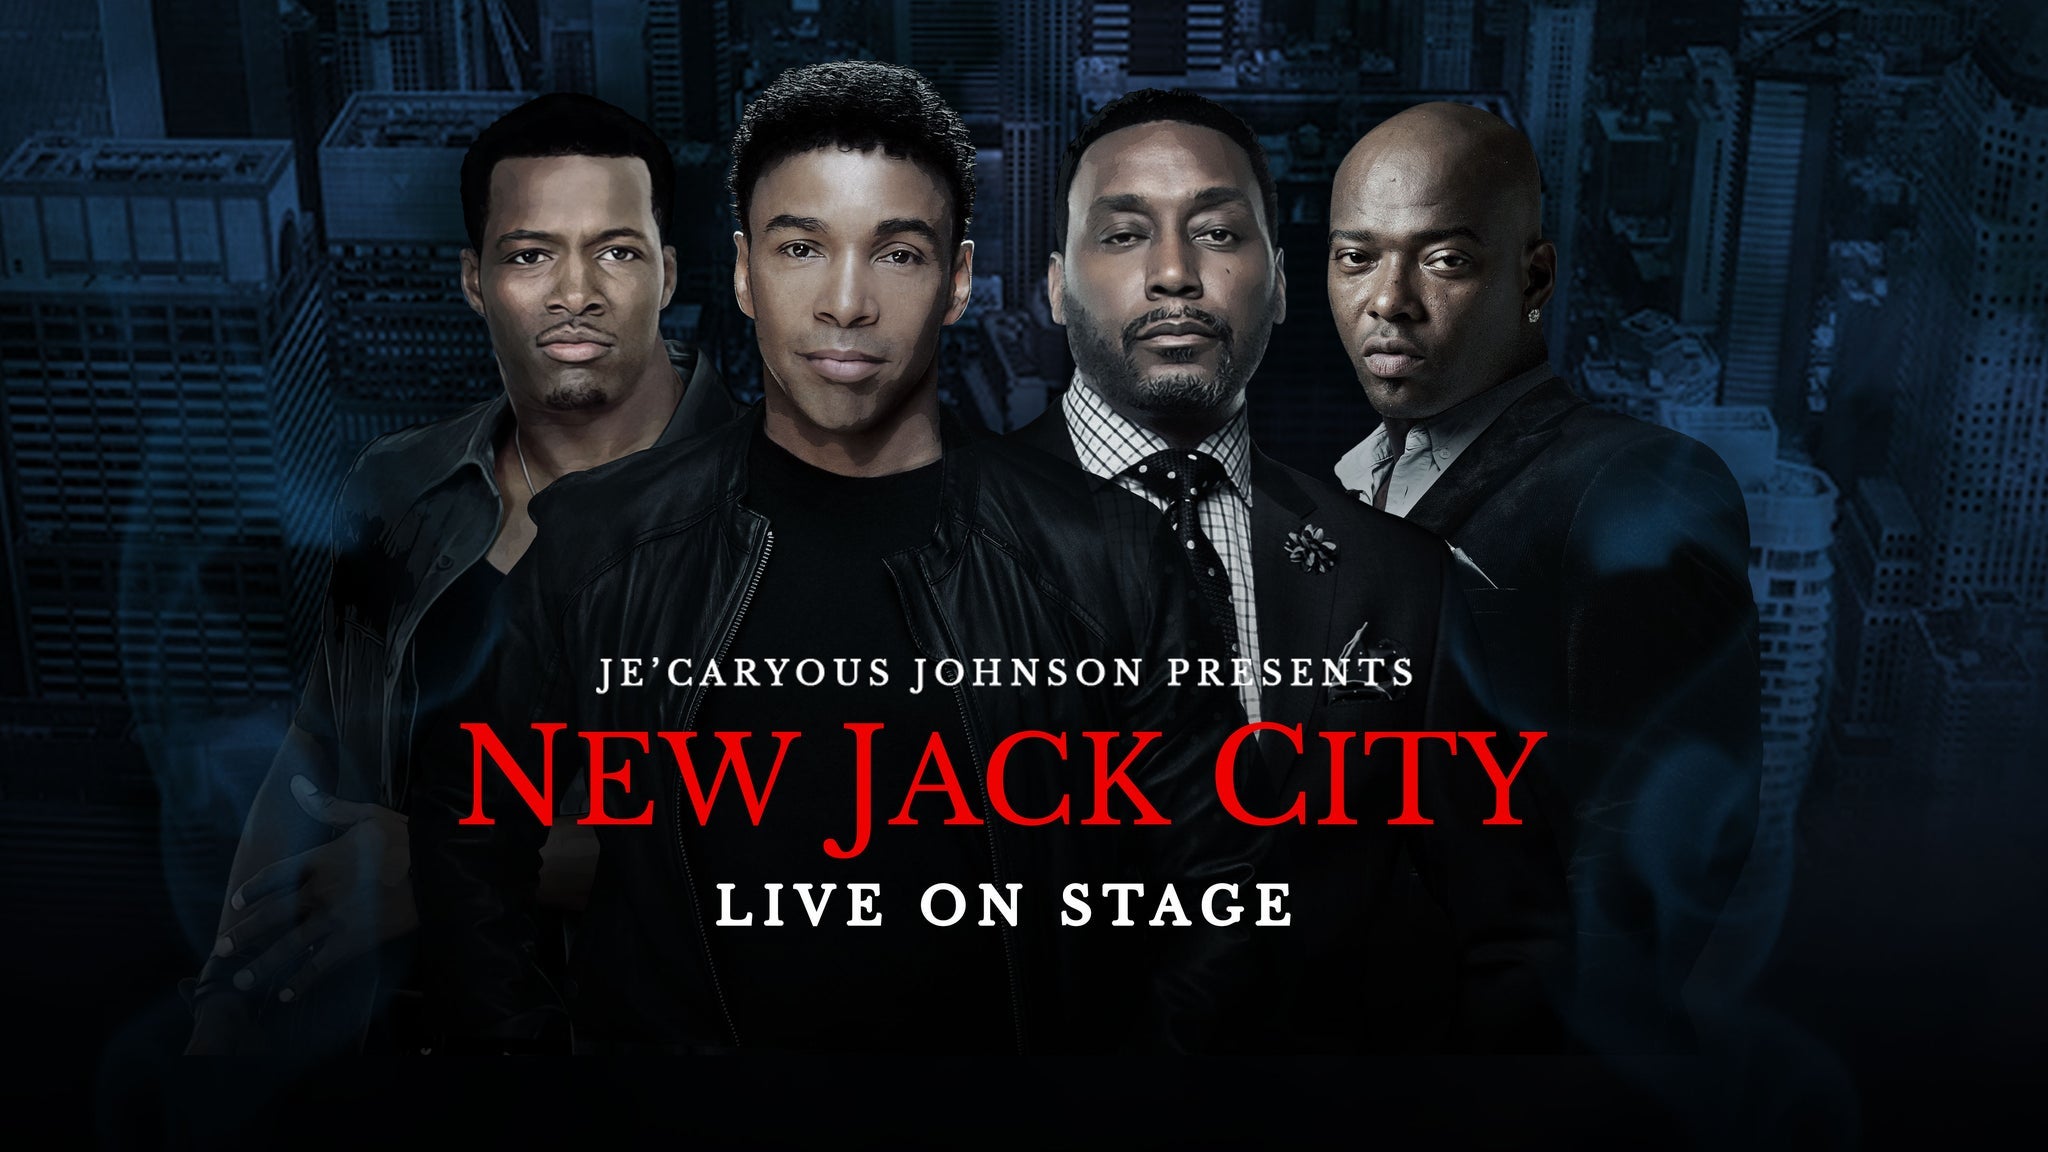 Je'Caryous Johnson Presents “NEW JACK CITY” Tickets Event Dates